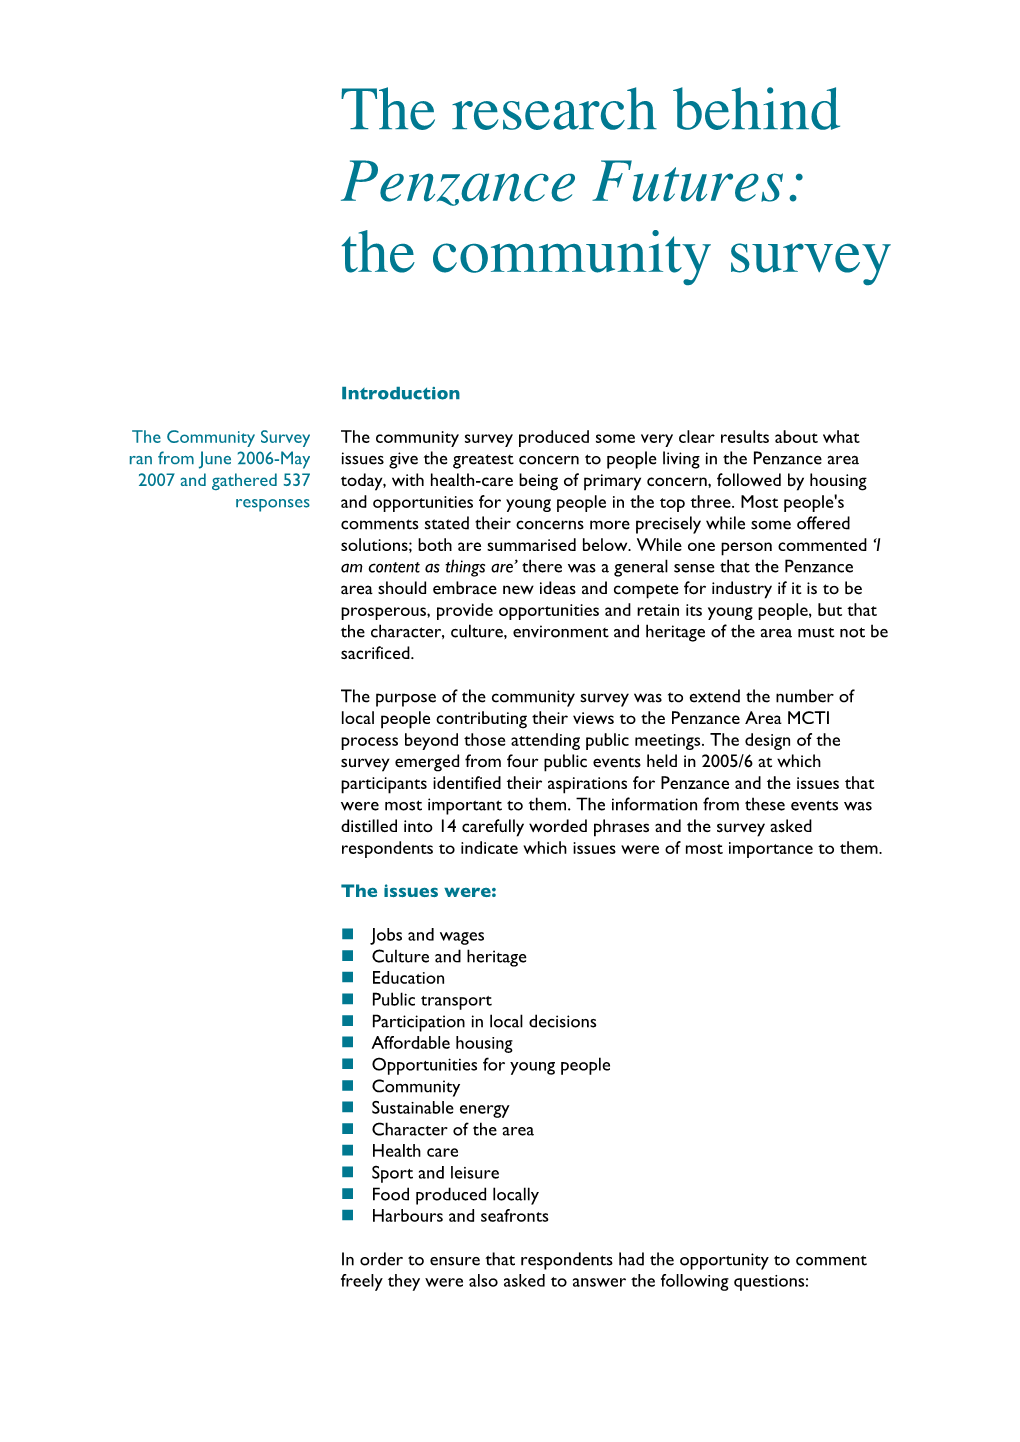 The Research Behind Penzance Futures: the Community Survey